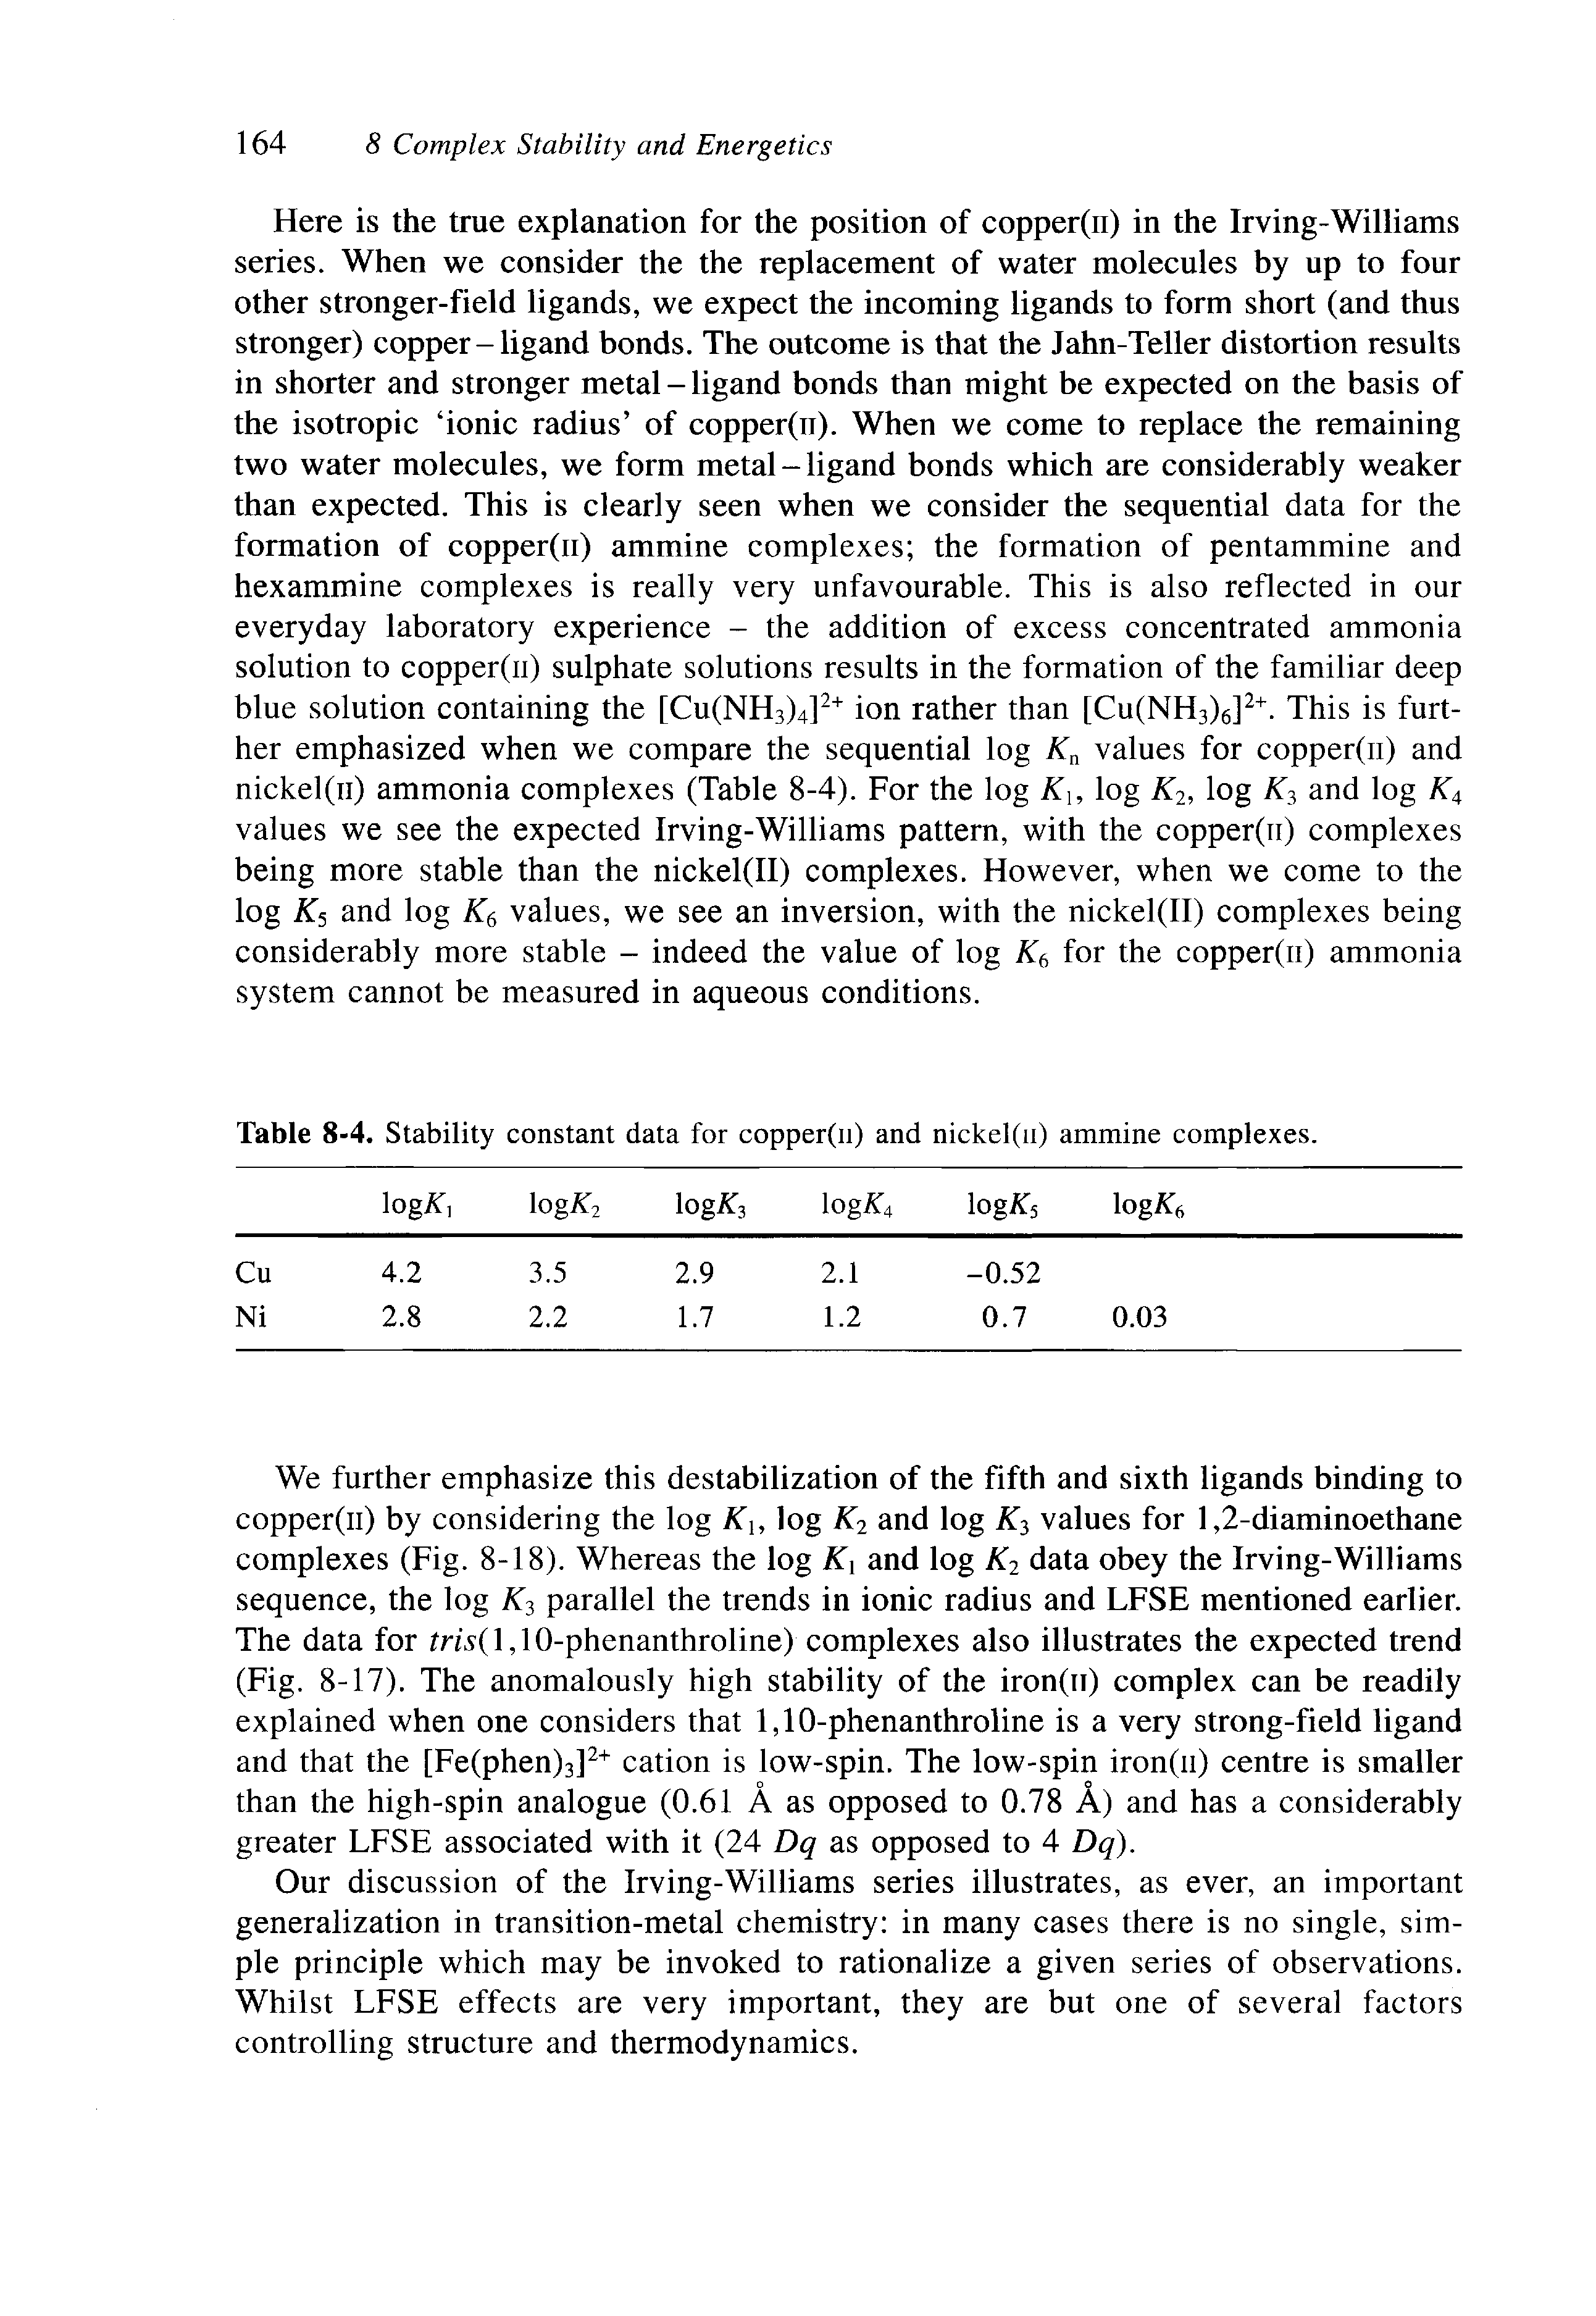 Table 8-4. Stability constant data for copper(ii) and nickel(ii) ammine complexes.